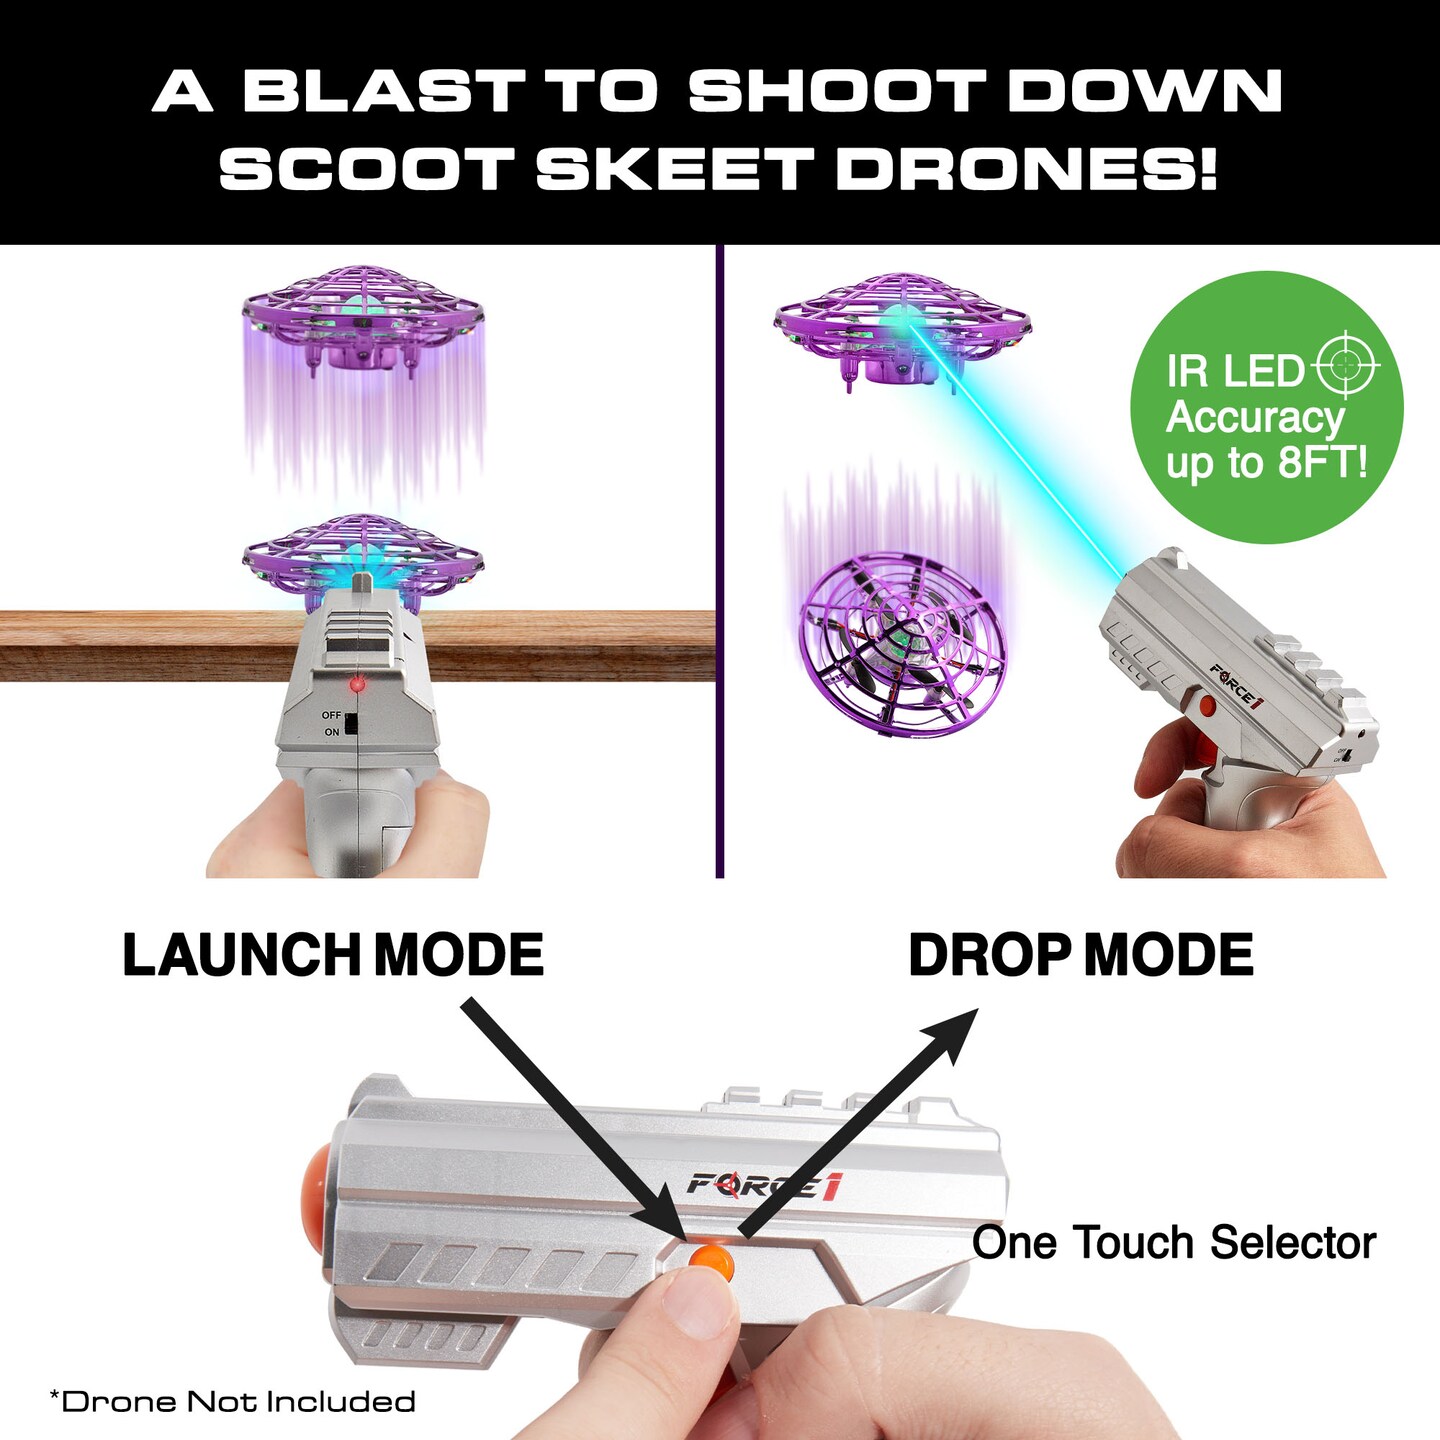 Force1 Blaster Gun Electronic Shooting Game for Kids and Adults (Blaster Only)